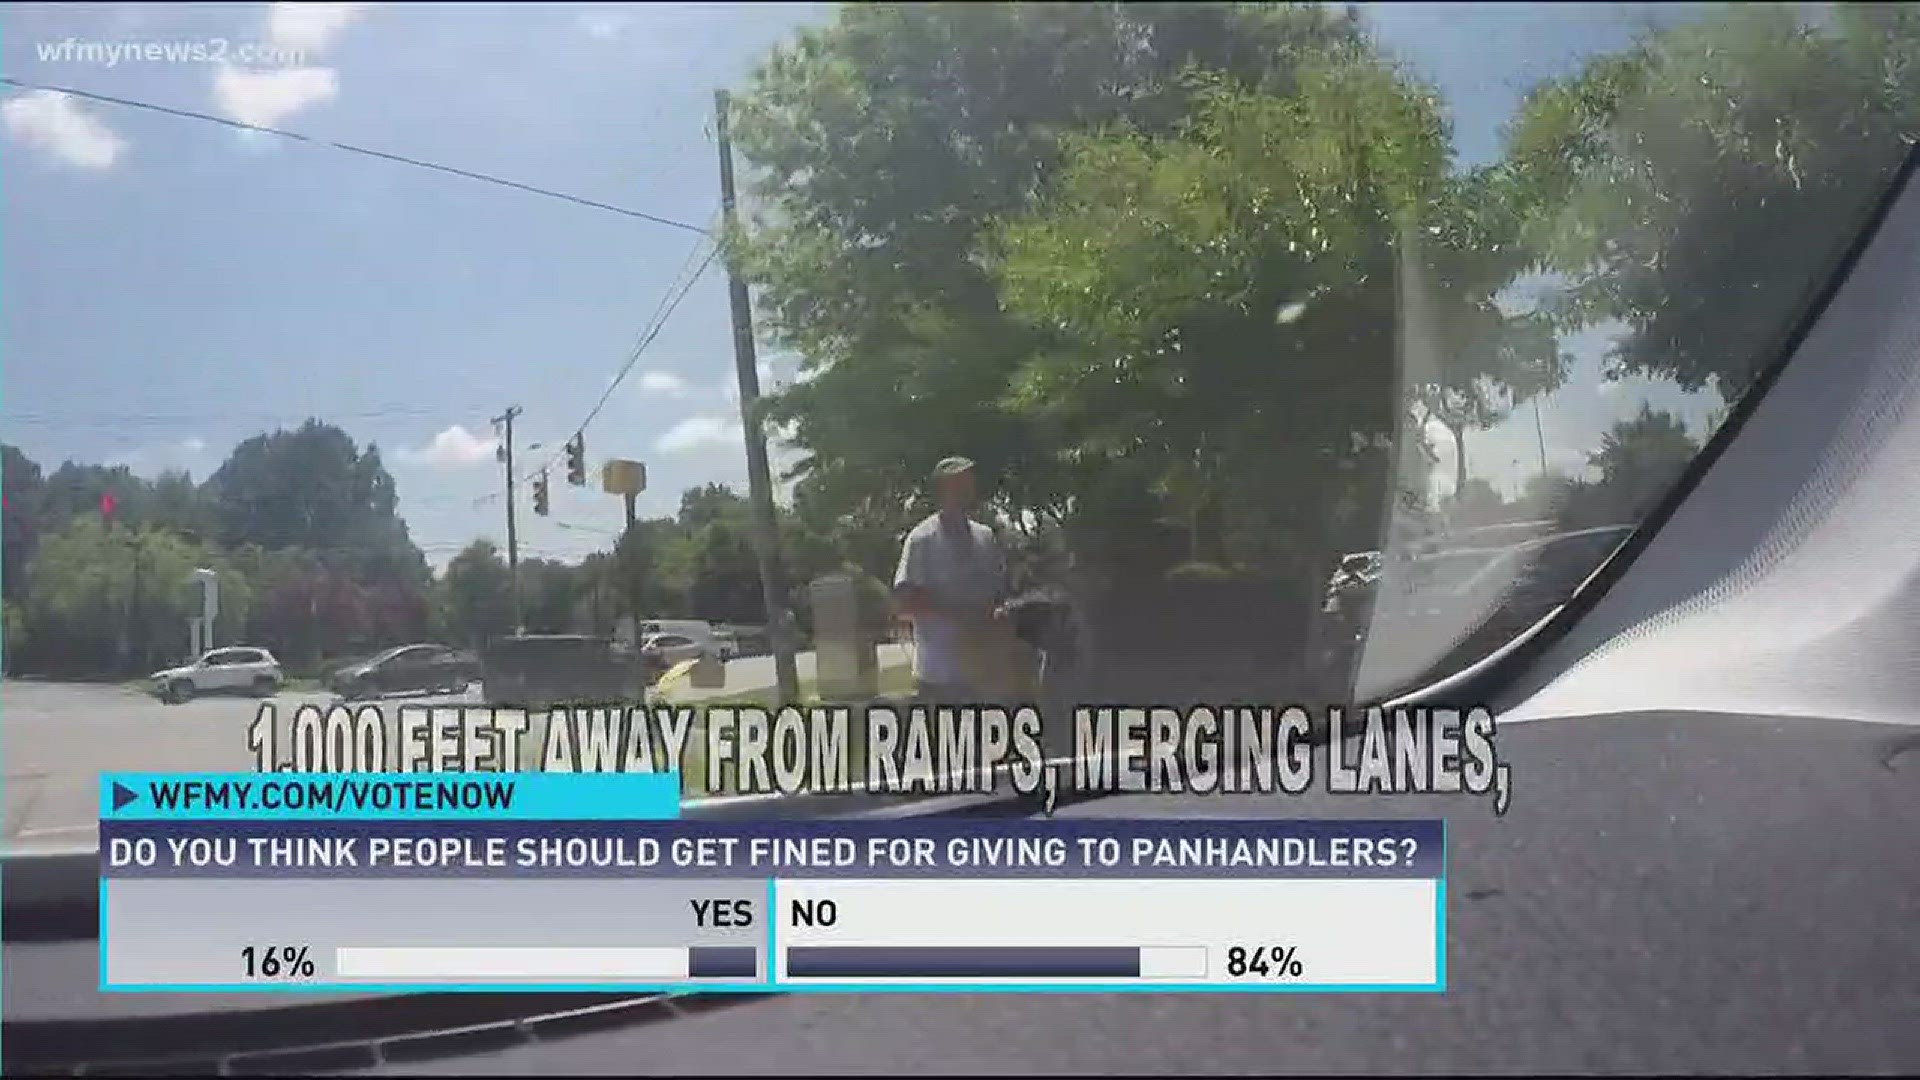 Should Panhandlers be fined?